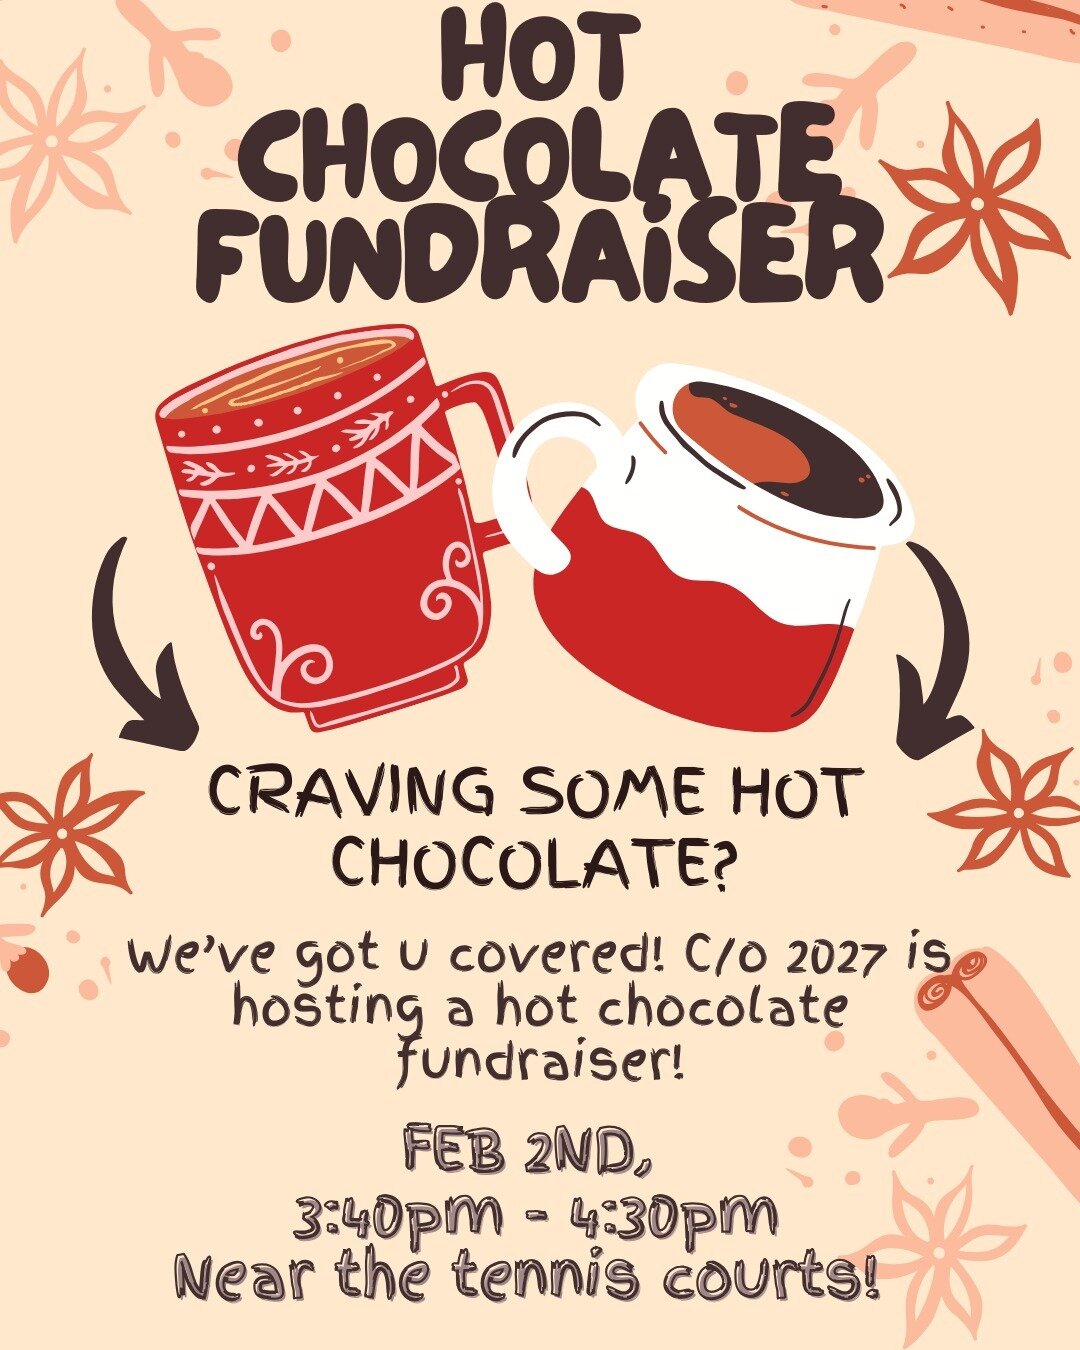 the class of 2027 is having at hot chocolate fundraiser after school from 3:40-4:30pm on Feb 2nd! bring some friends along and help support the class of 2027 by buying some hot chocolate!